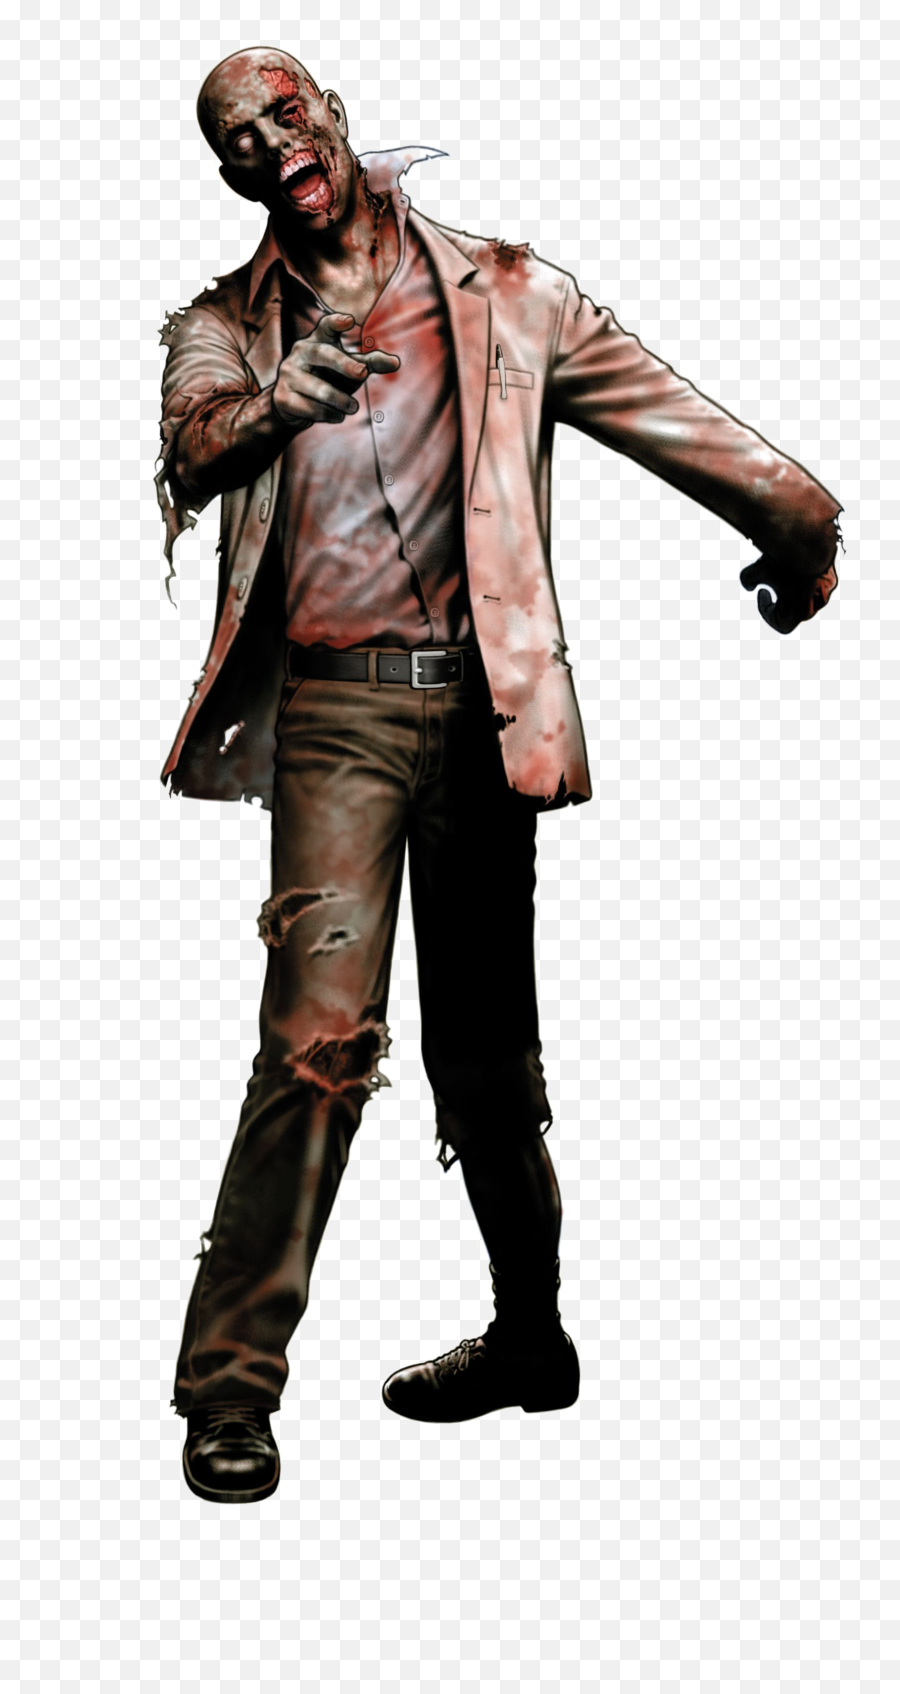 Zombie Transparent Png Images In - Resident Evil Ds Zombie,Zombie Transparent Background